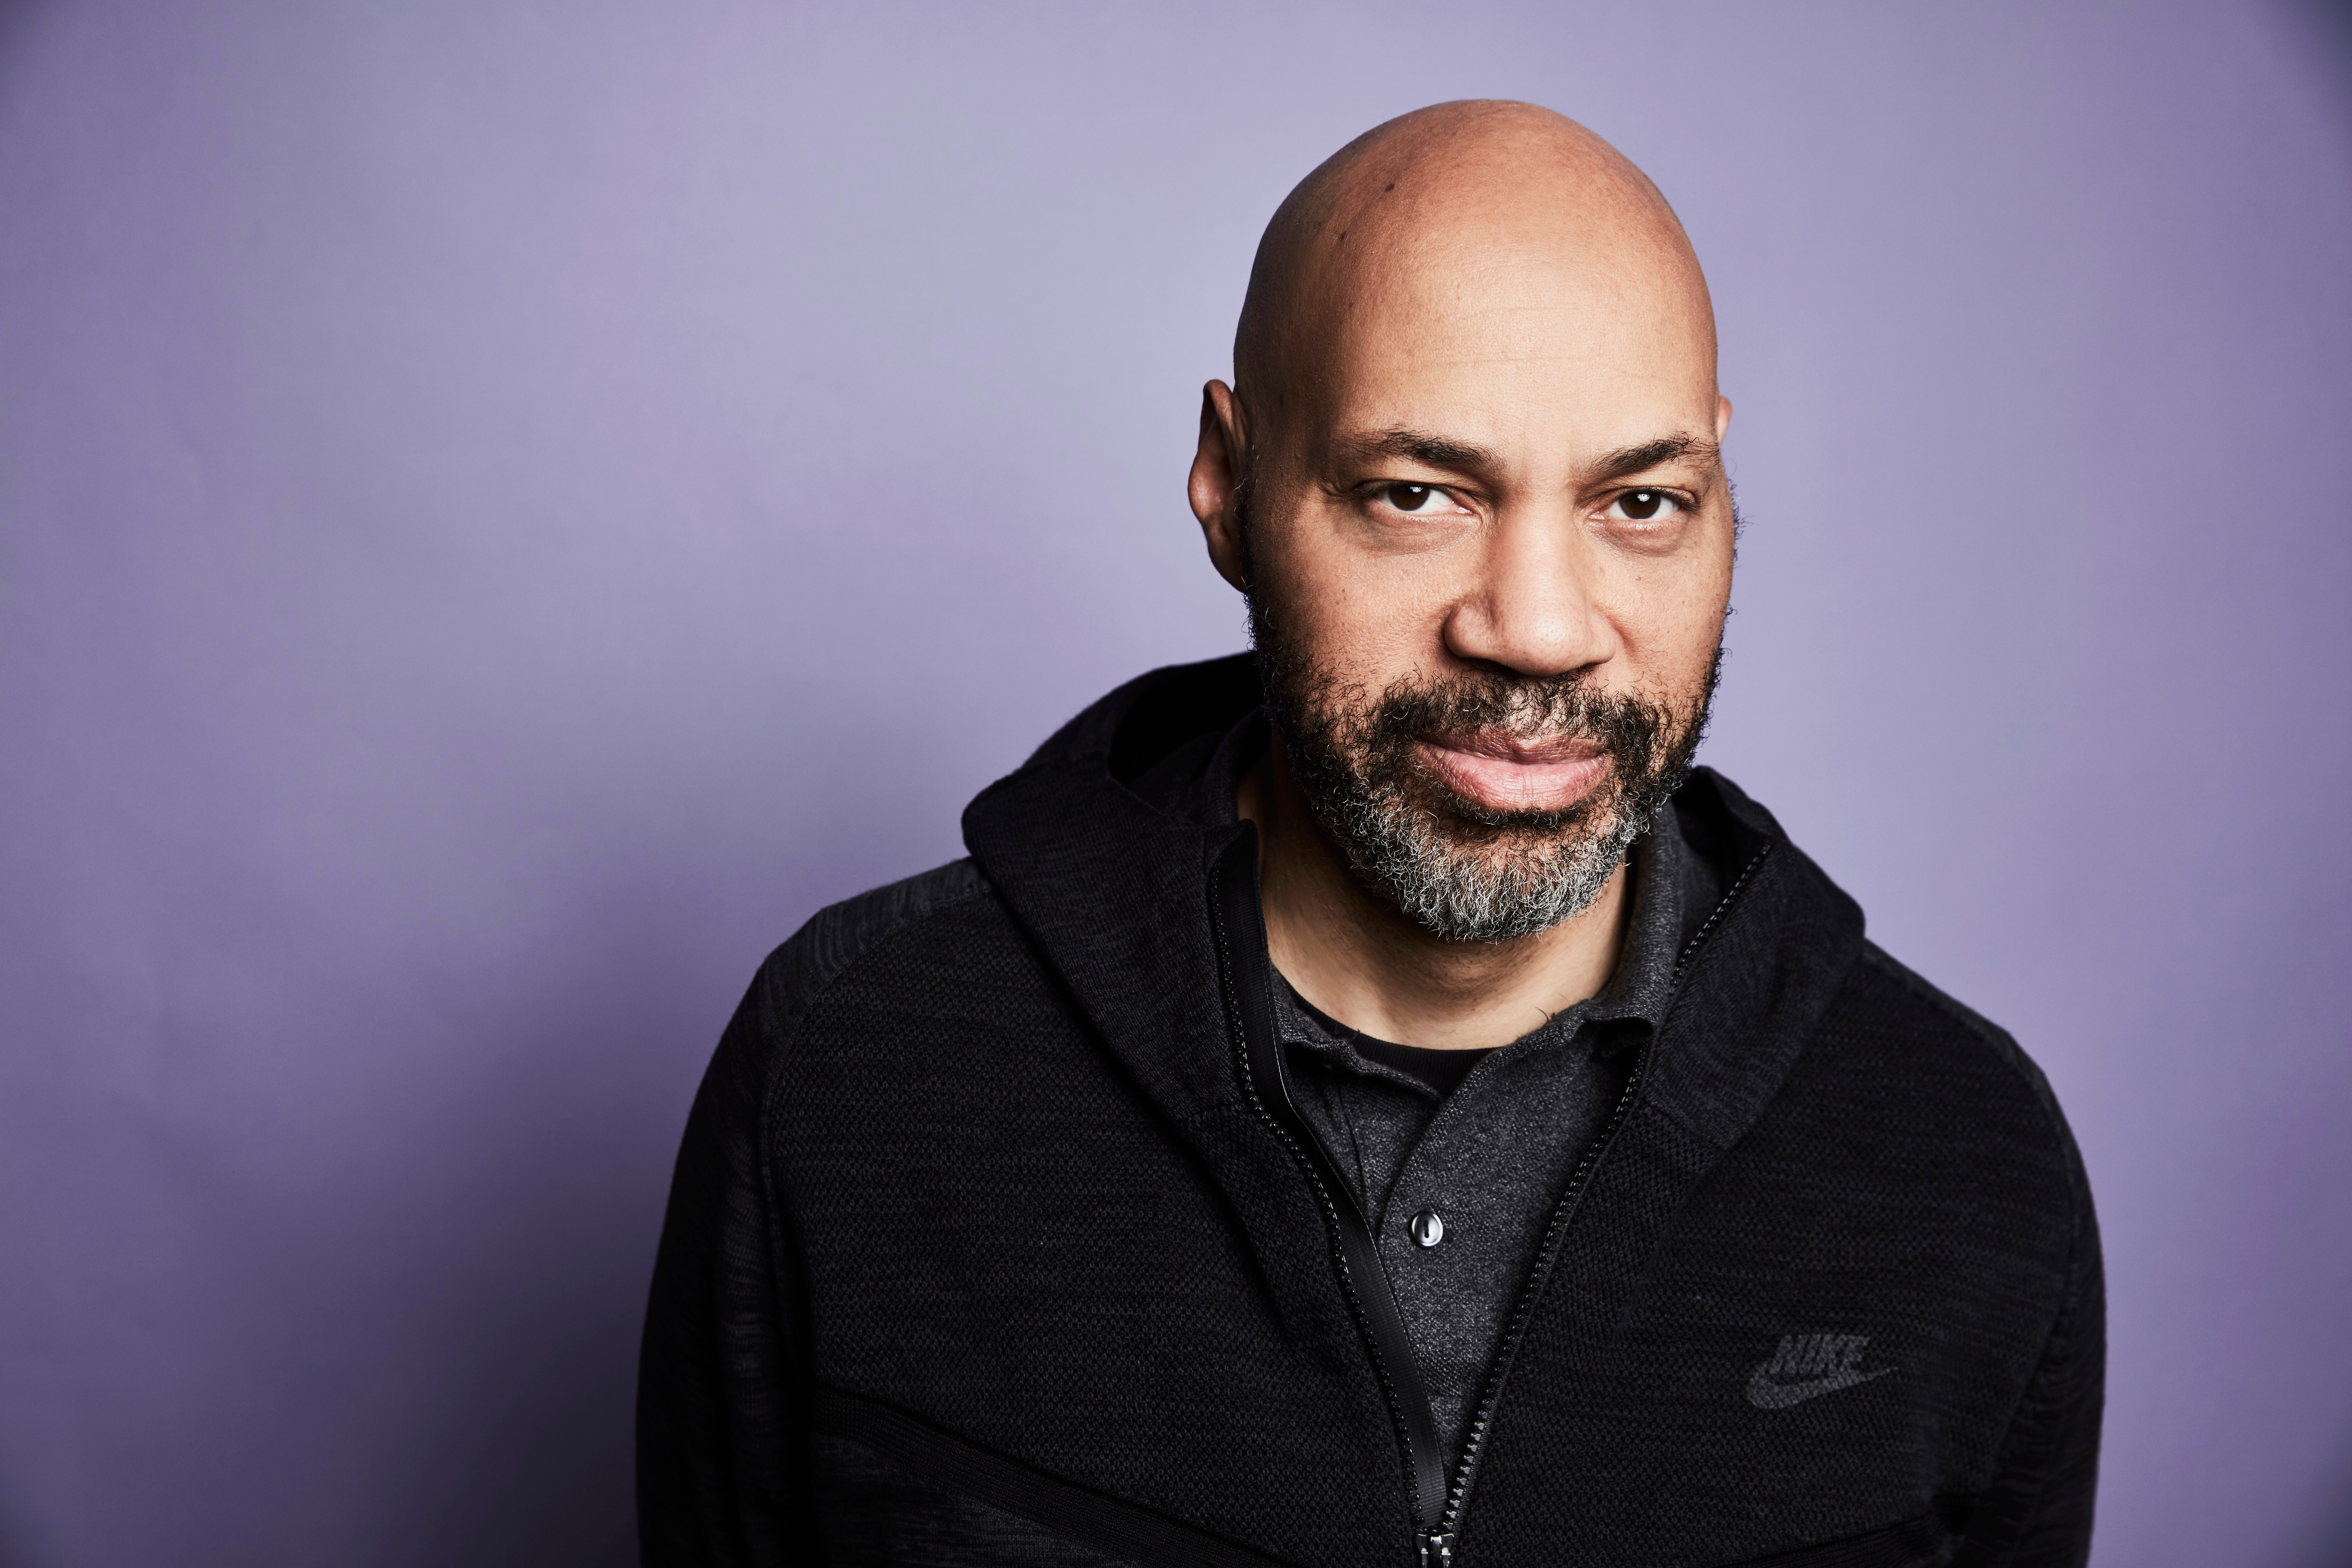 ‘Guerilla’ Director John Ridley Says Black Women Are Erased From His Series Because He’s ‘In A Mixed Race Relationship’